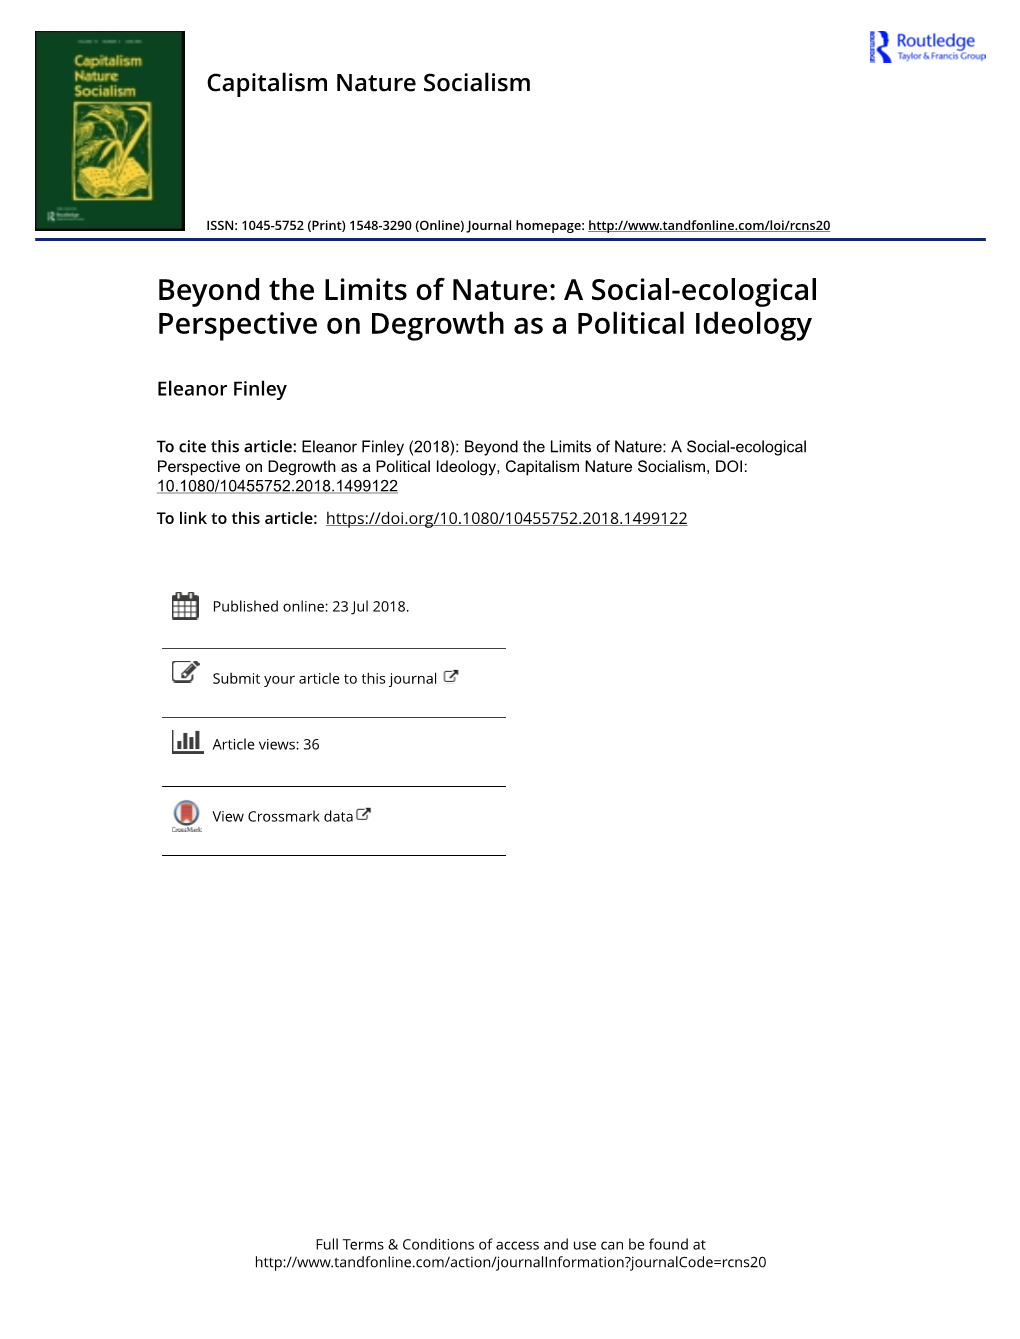 A Social-Ecological Perspective on Degrowth As a Political Ideology